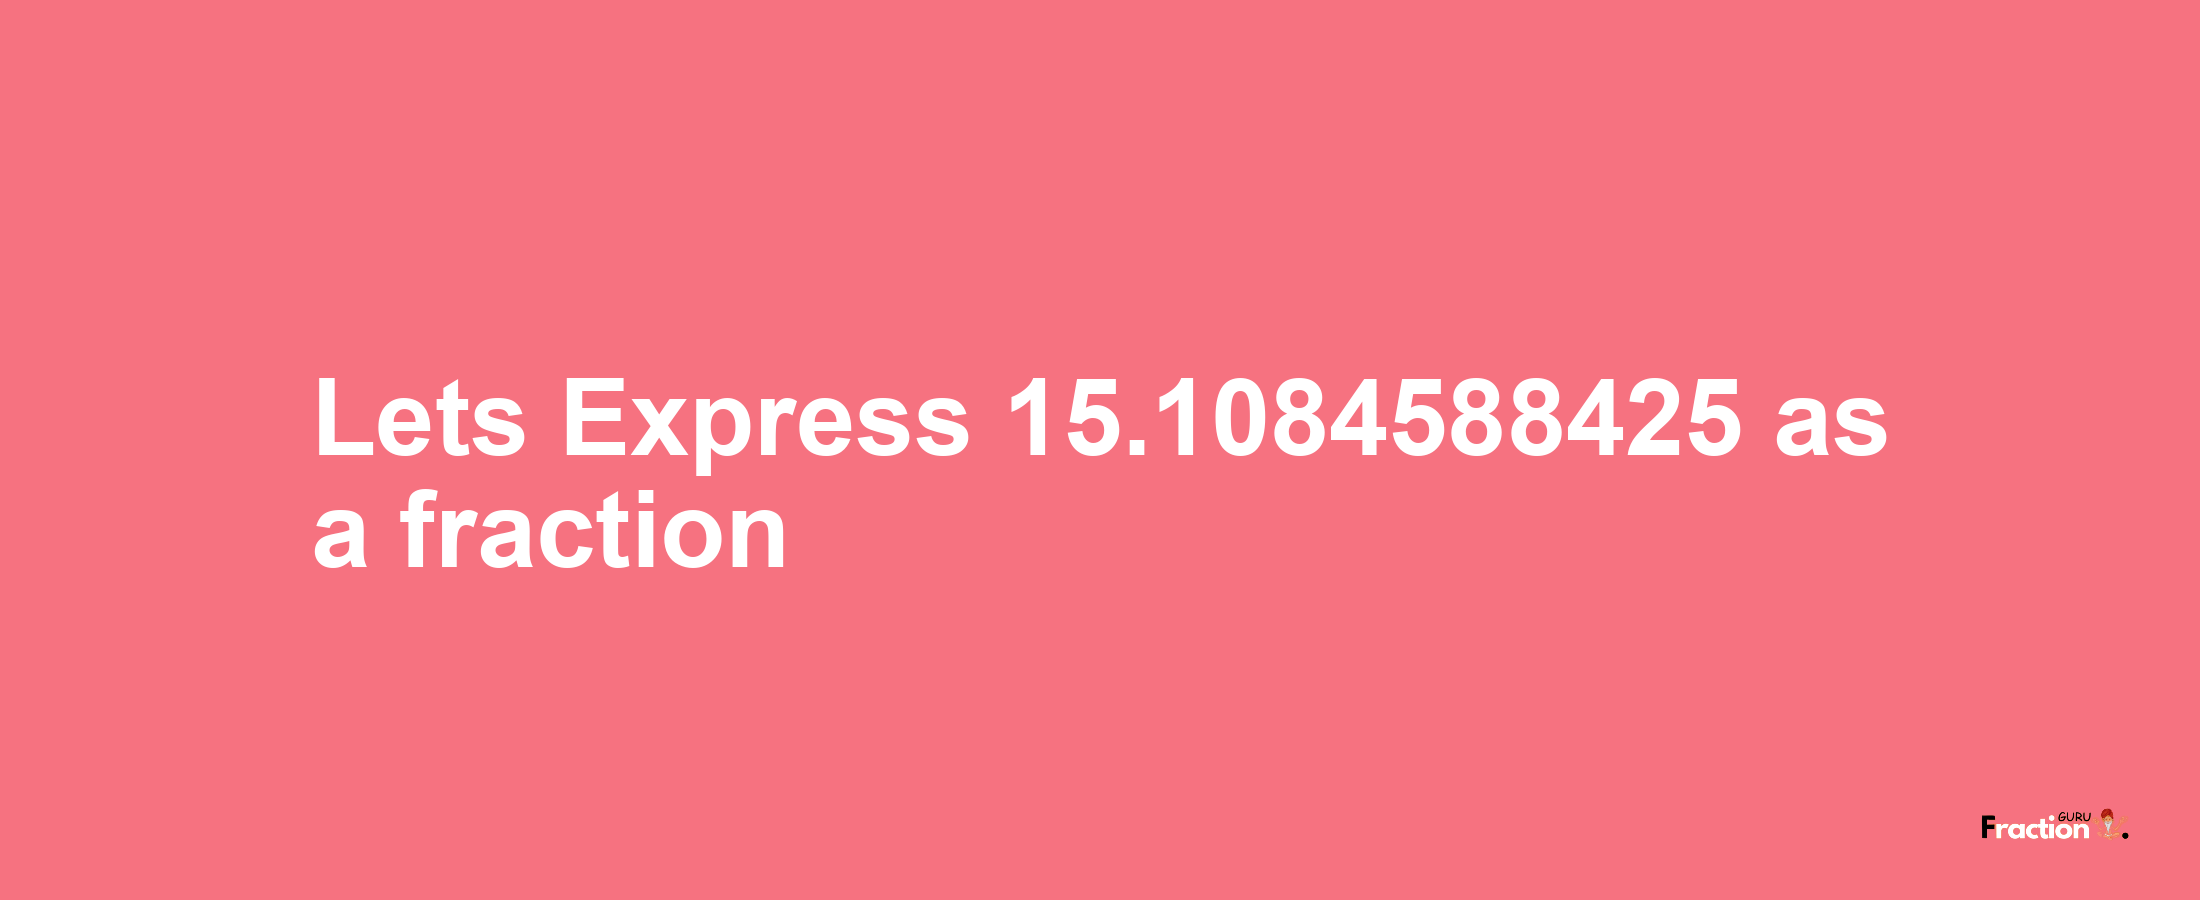 Lets Express 15.1084588425 as afraction